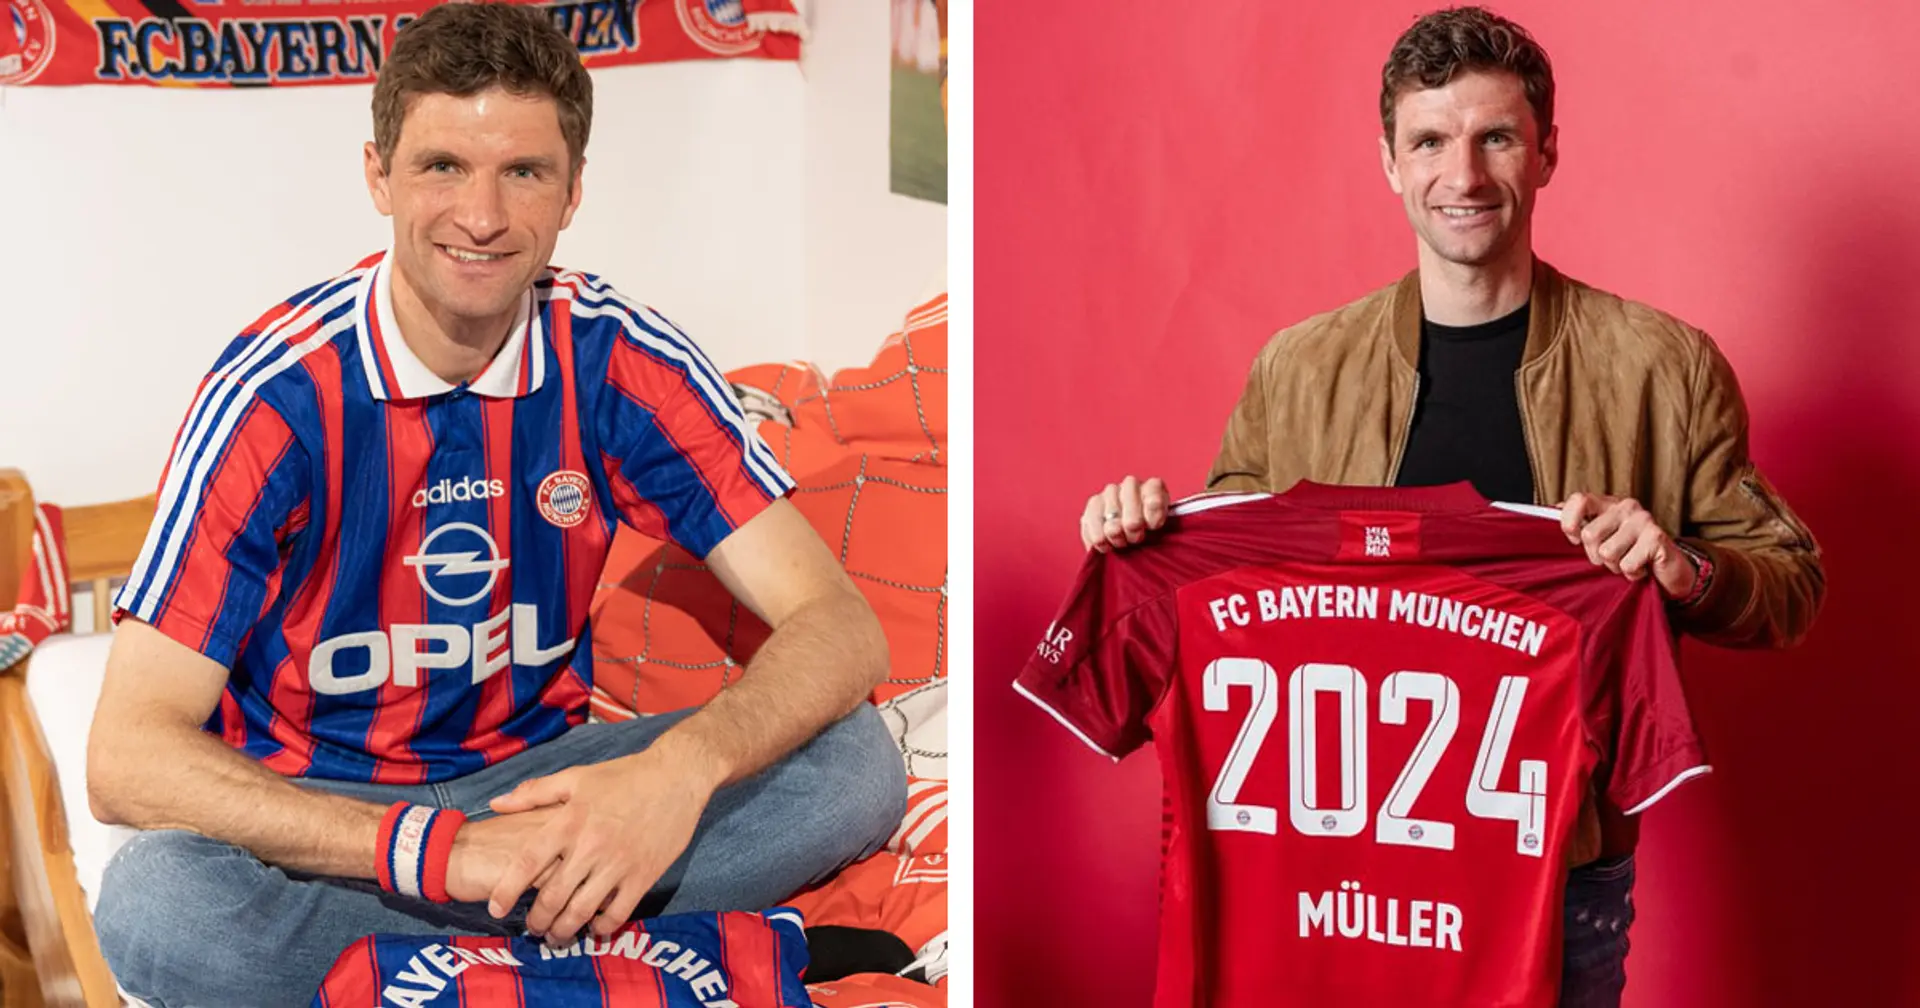 OFFICIAL: Thomas Muller signs new 2-year contract with Bayern Munich